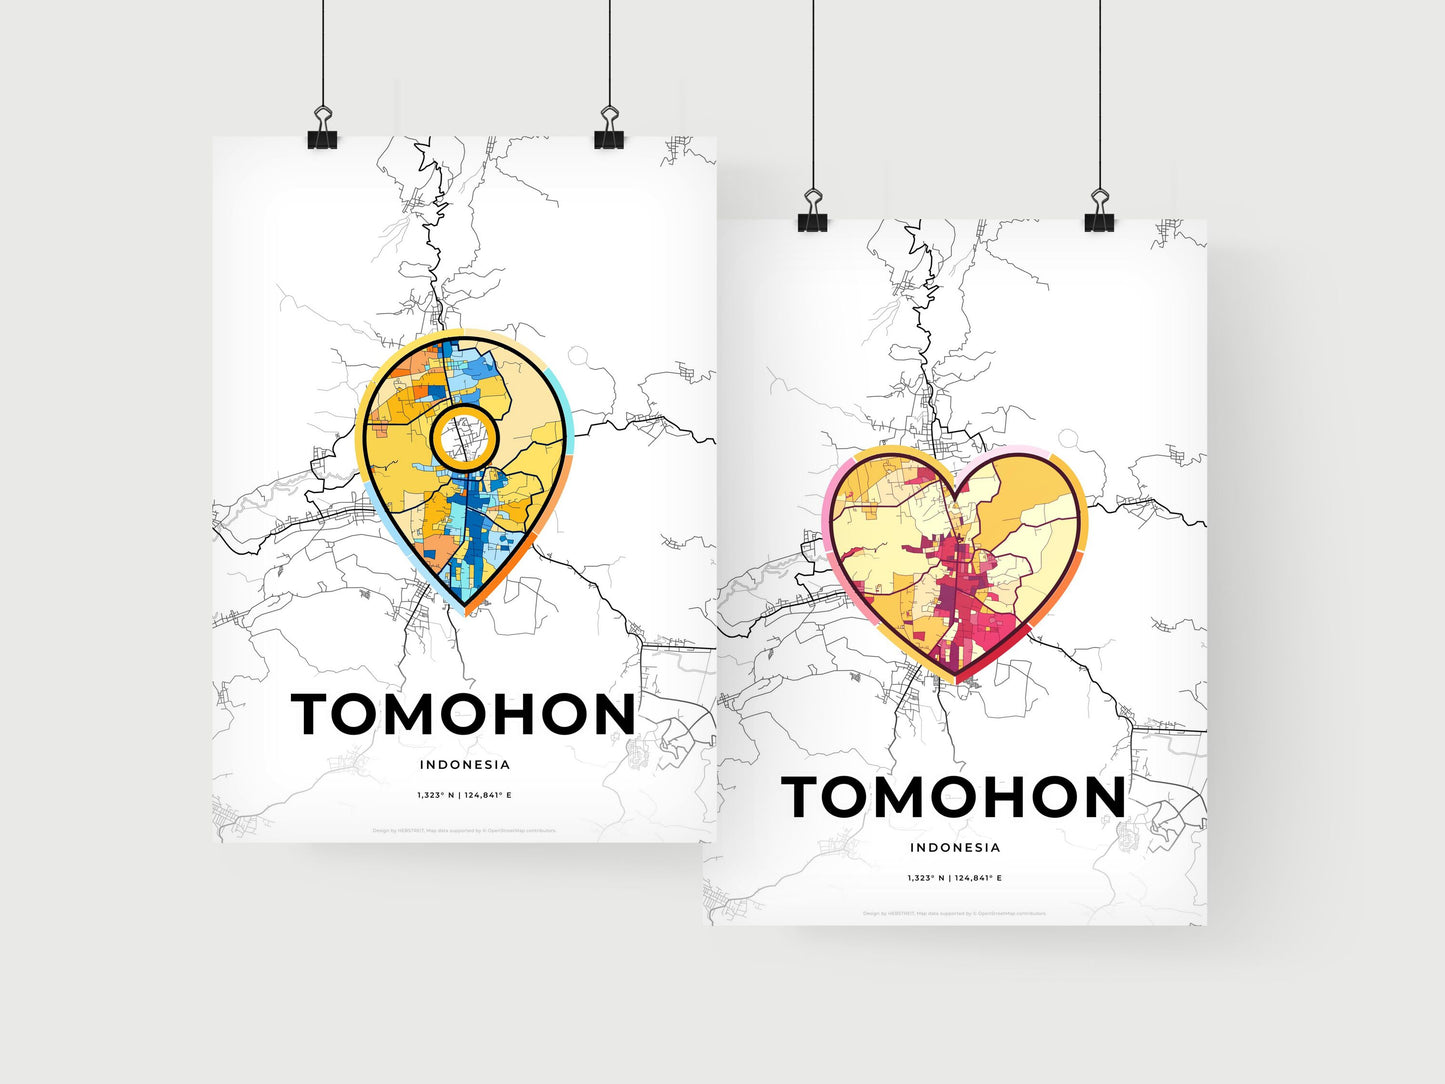 TOMOHON INDONESIA minimal art map with a colorful icon.